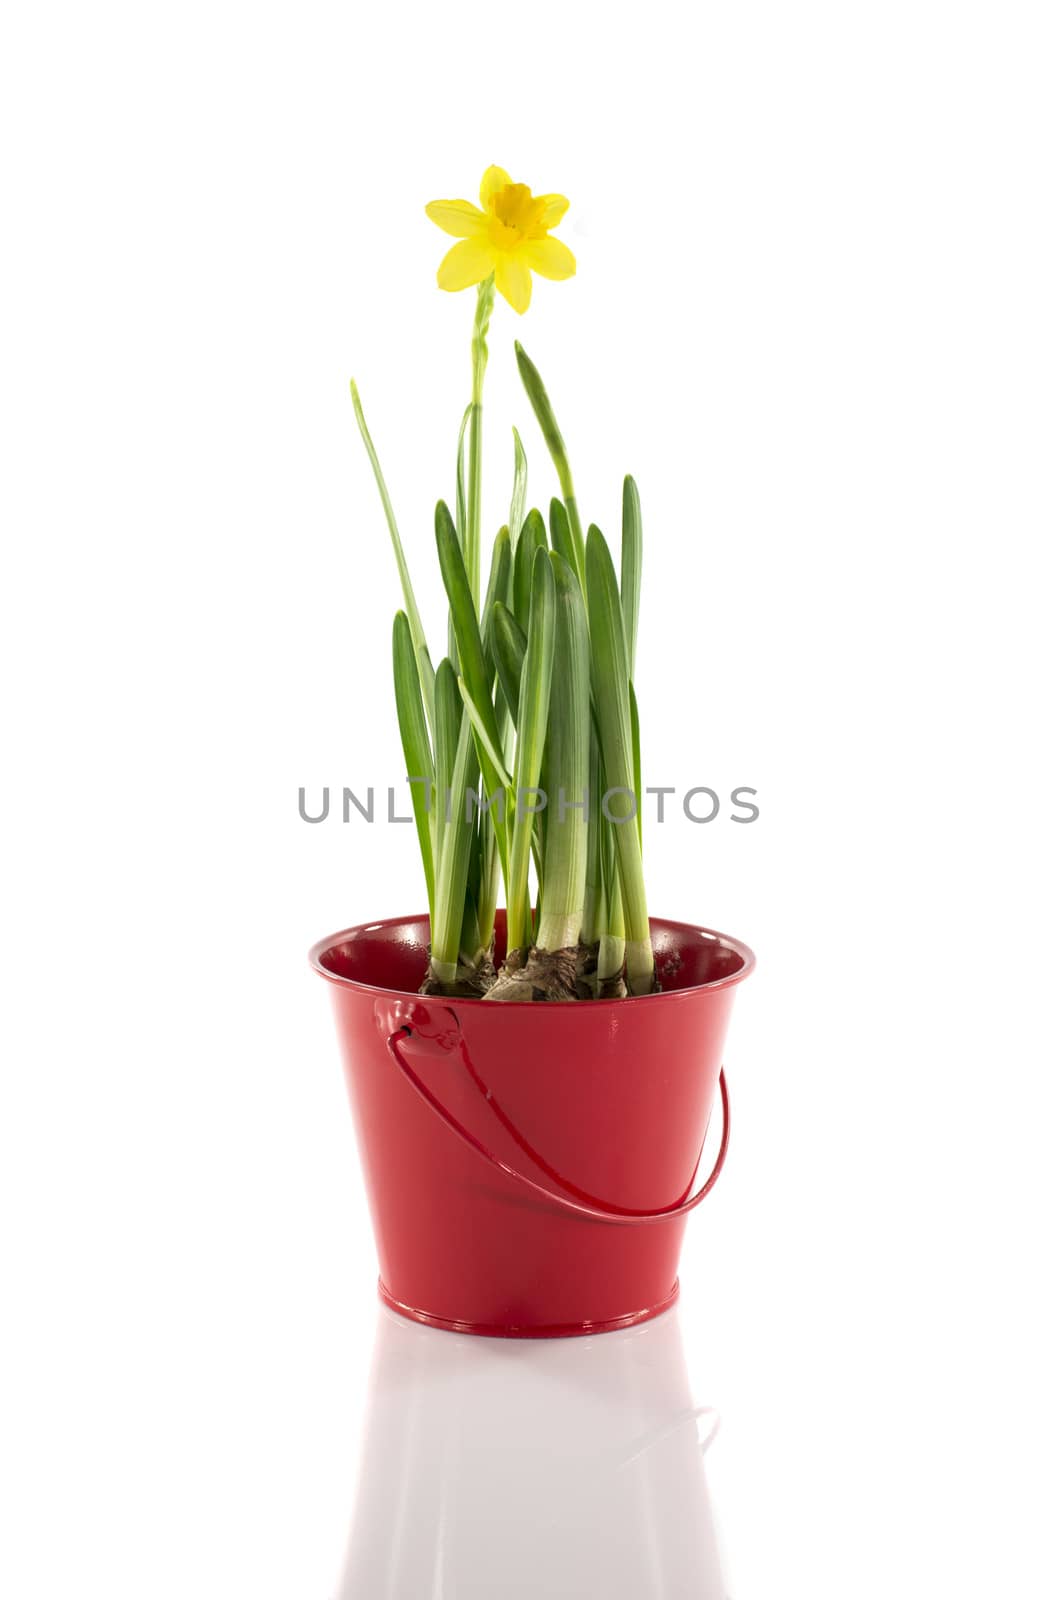 red bucket with yellow narcissus flower in spring